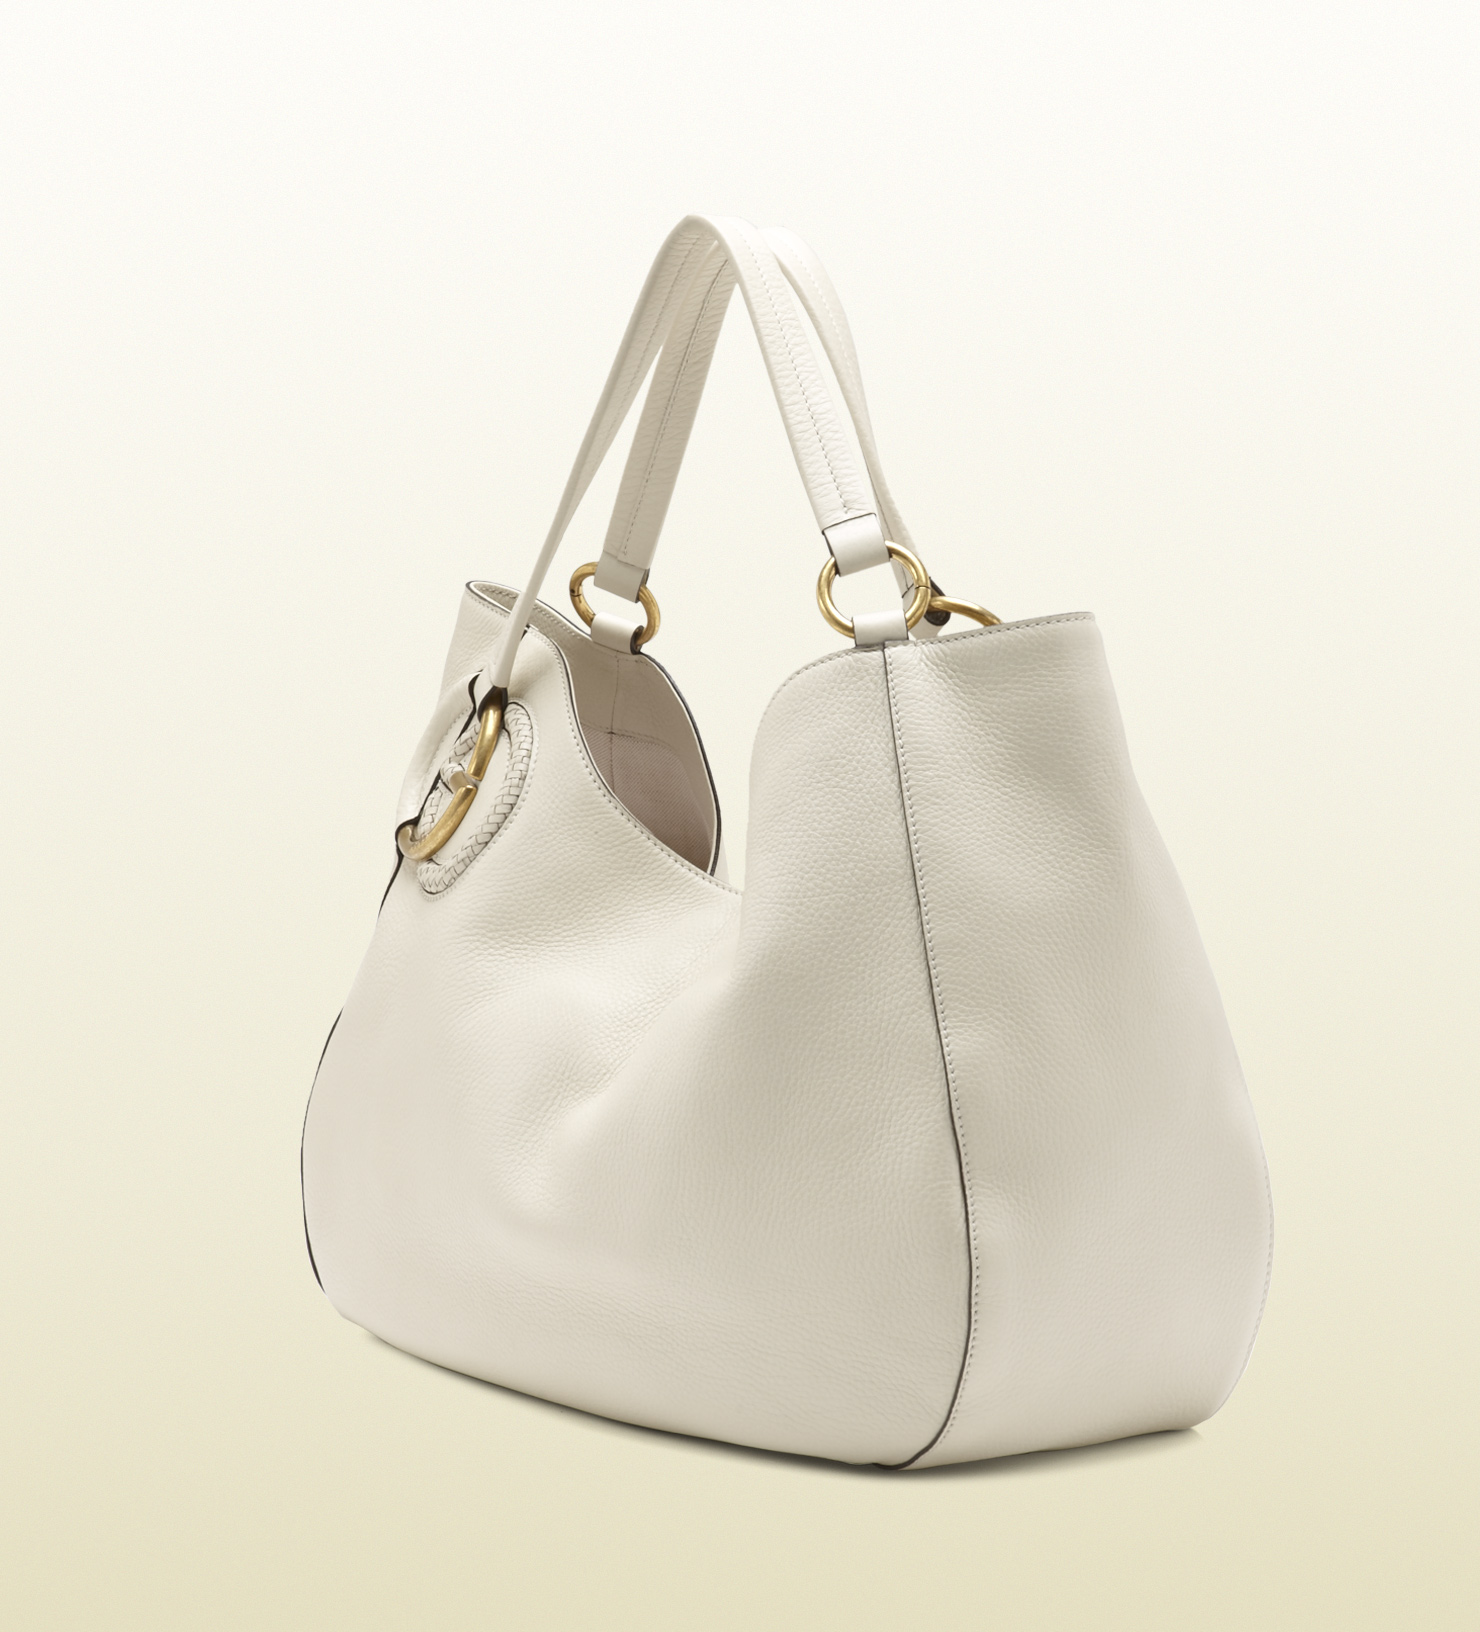 Lyst - Gucci Twill White Leather Shoulder Bag in White